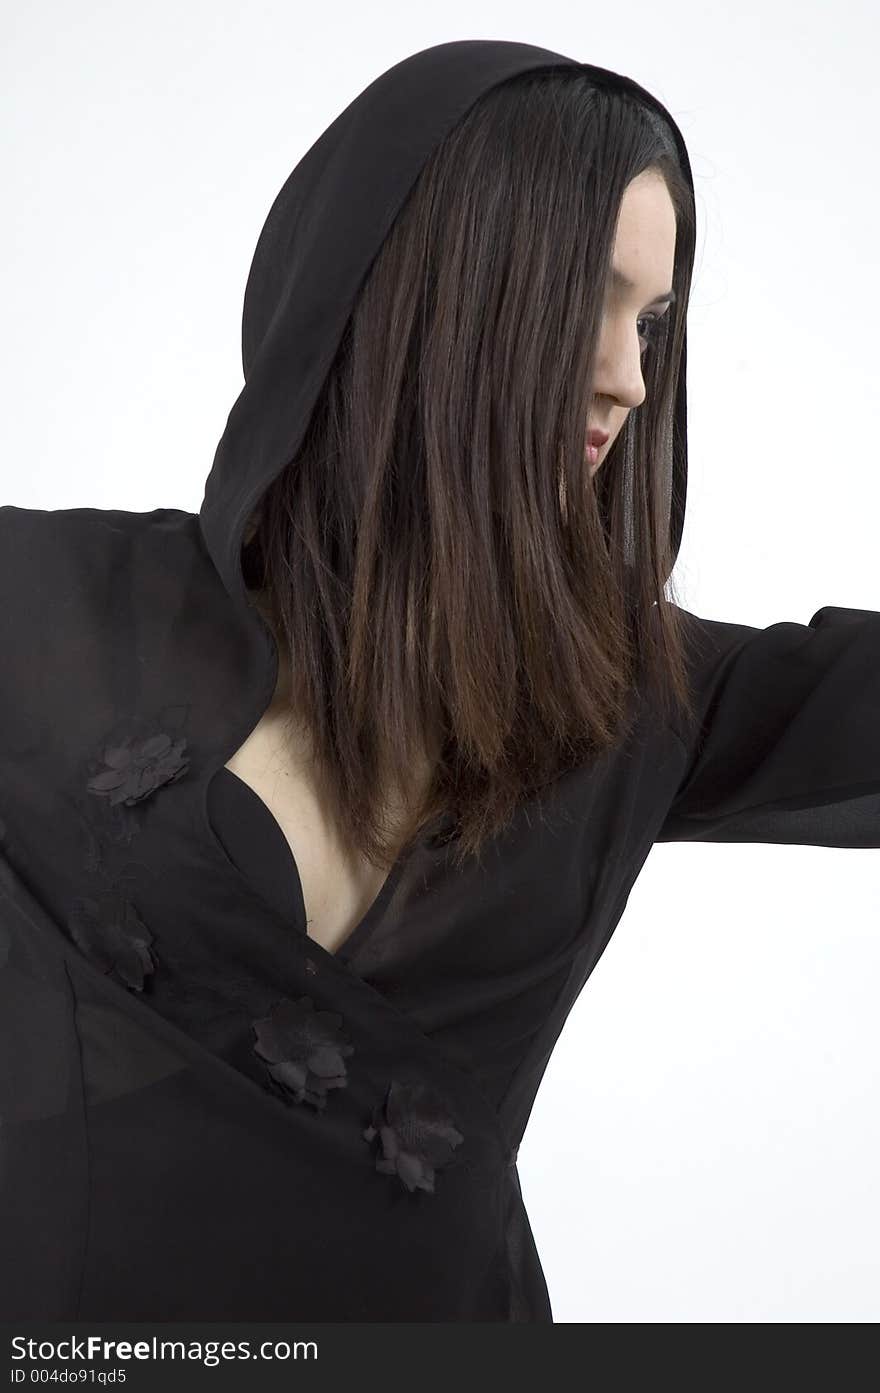 Poetic stance of an adolescent woman dressed in black, wearing a hood.